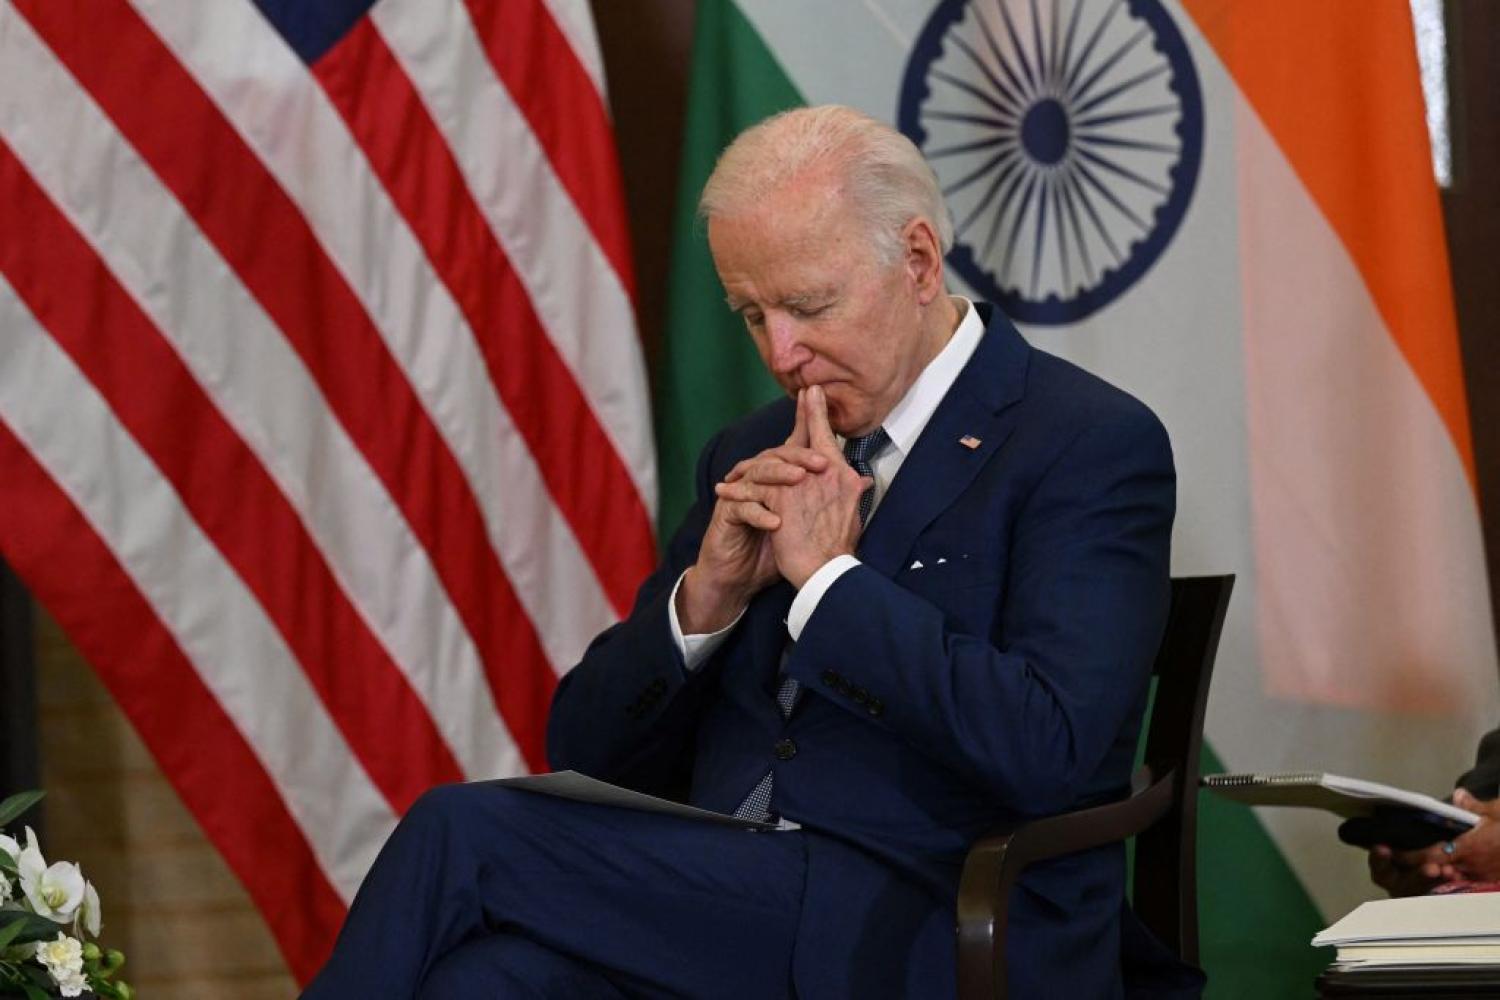 It is a curious decision for President Joe Biden not to attend a summit where the United States will takeover as the group’s chair country for 2023 (Saul Loeb/AFP via Getty Images)